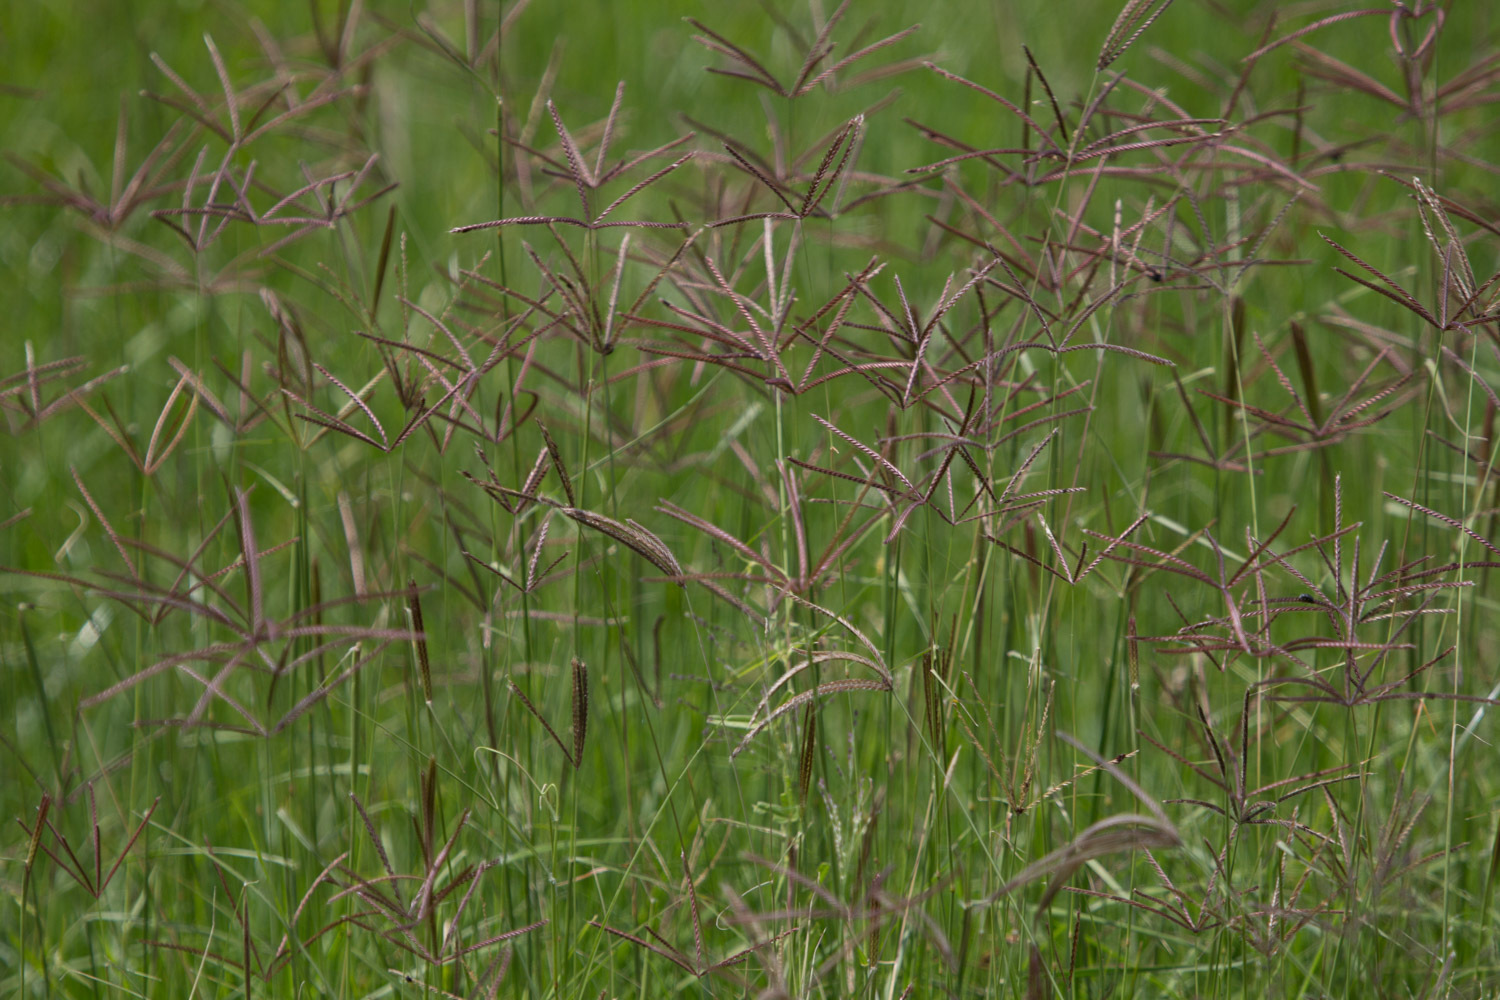 Photograph of Rhodes grass growing in Tanzania. The photo shows the inflorescences of multiple Rhodes grass plants. Each inflorescence consists of multiple branches radiating from a single point.